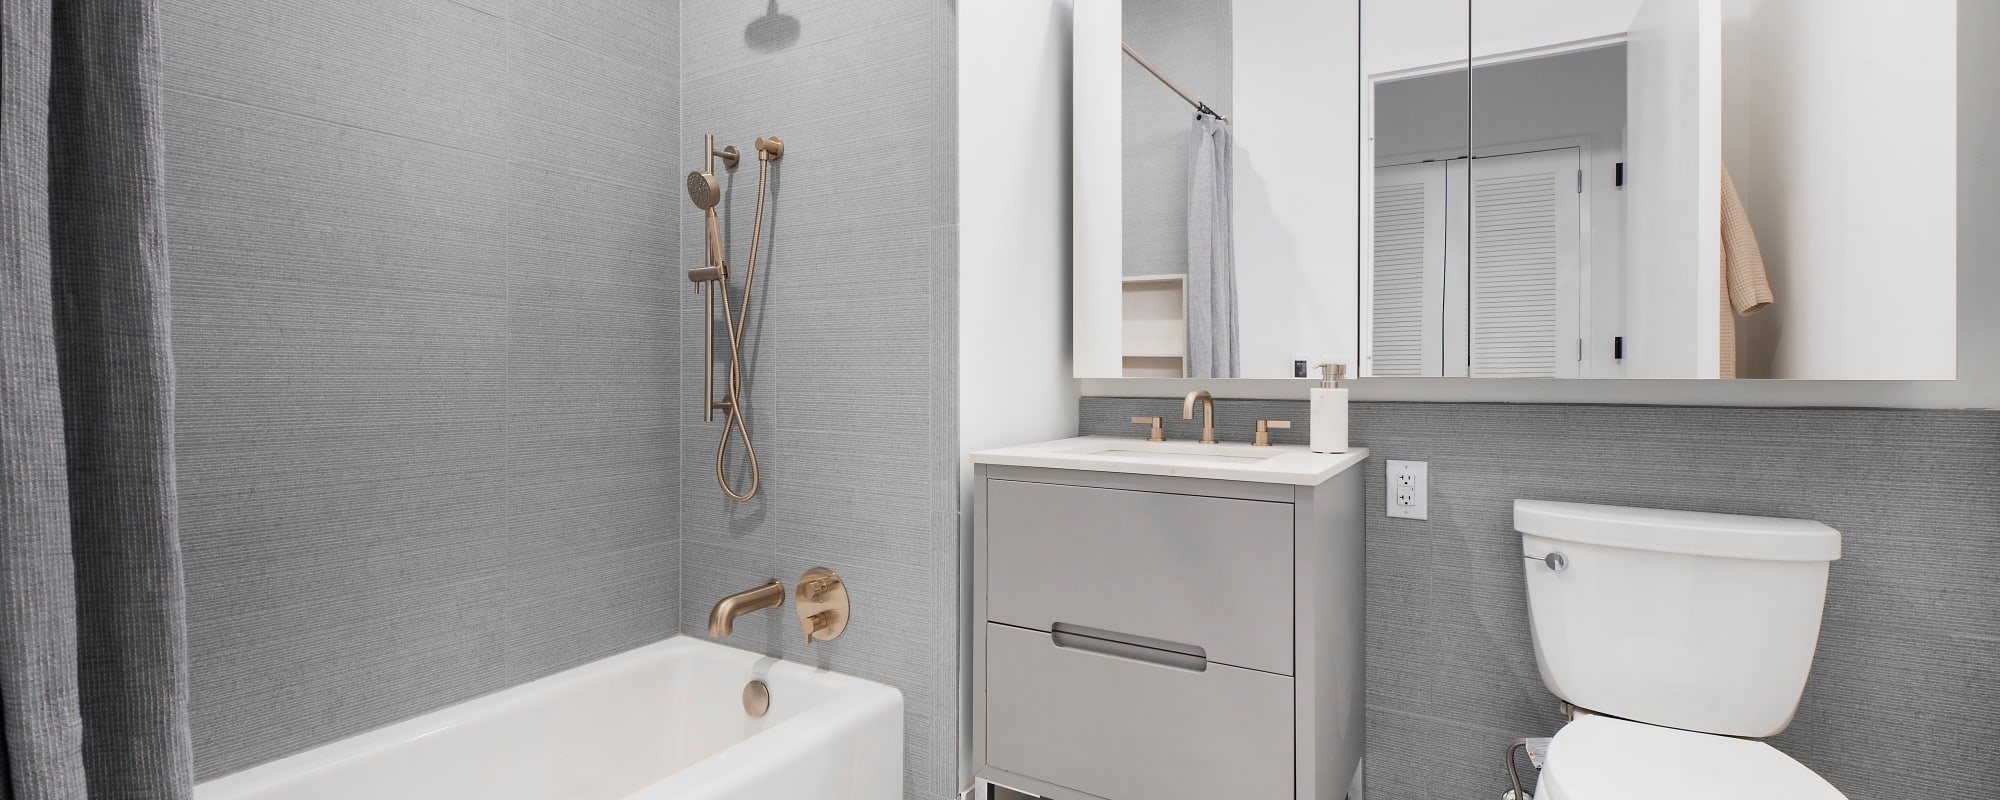 Rendering bathroom on apartment model at 8 Court Square in Long Island City, New York